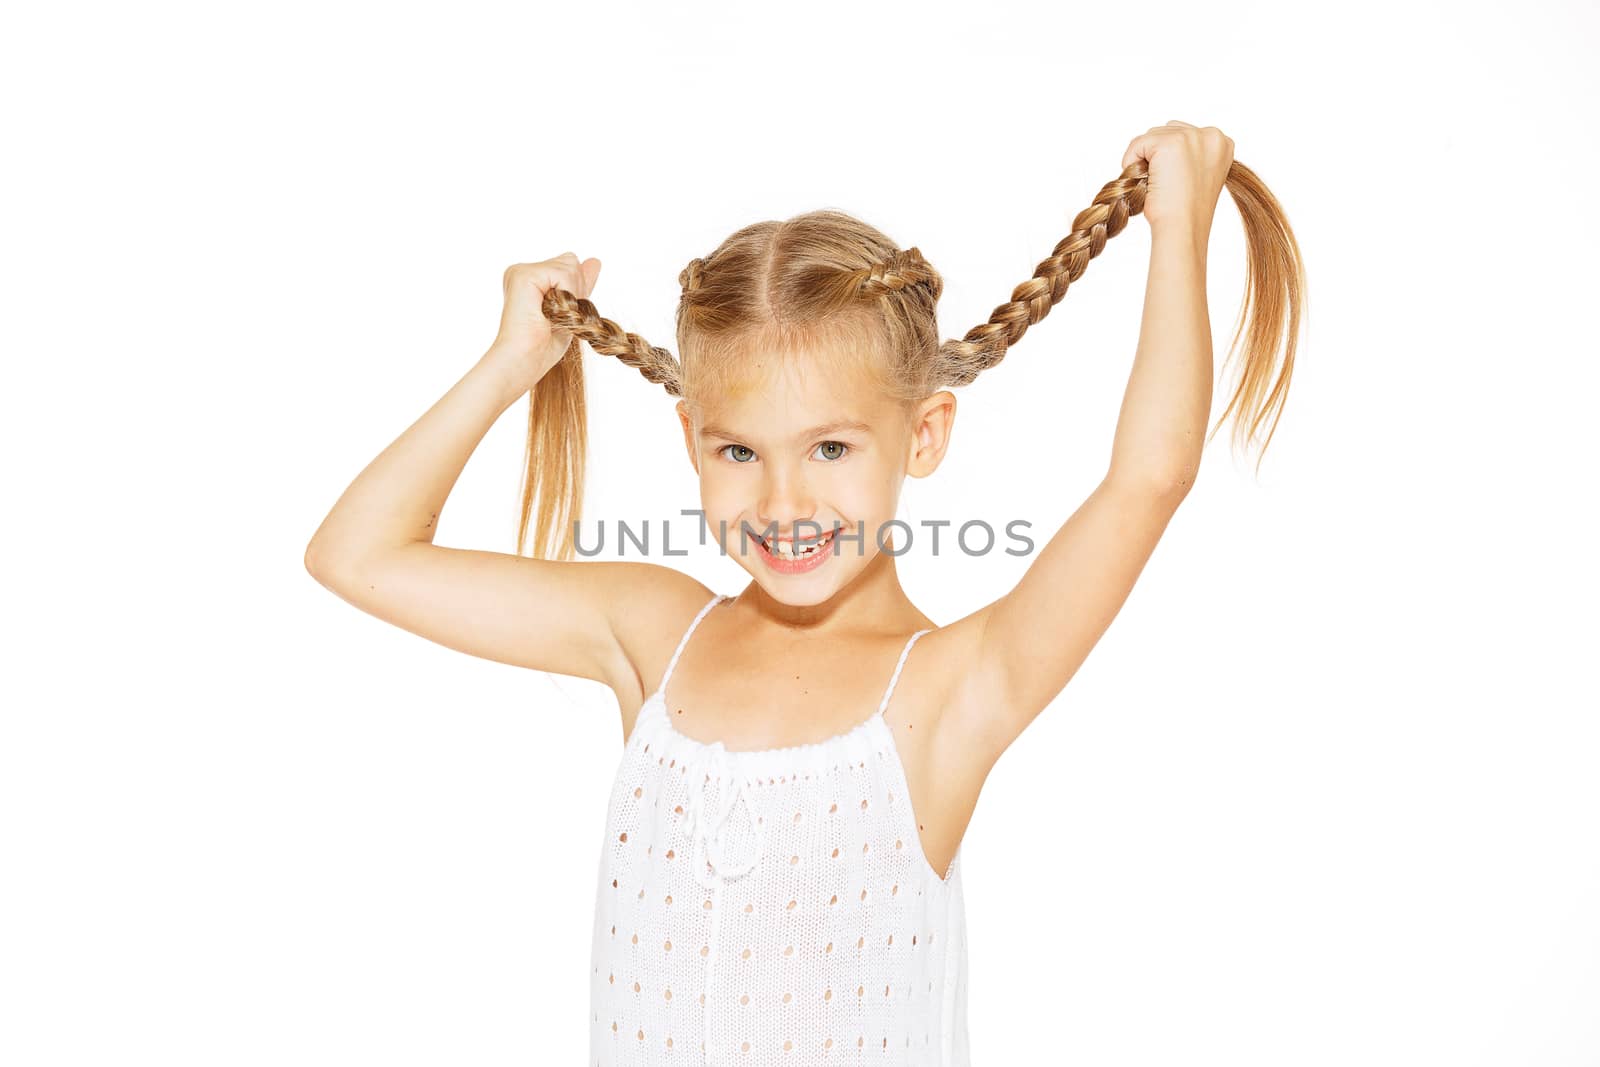 Funny little girl with a charming smile in a white dress holding a pigtails